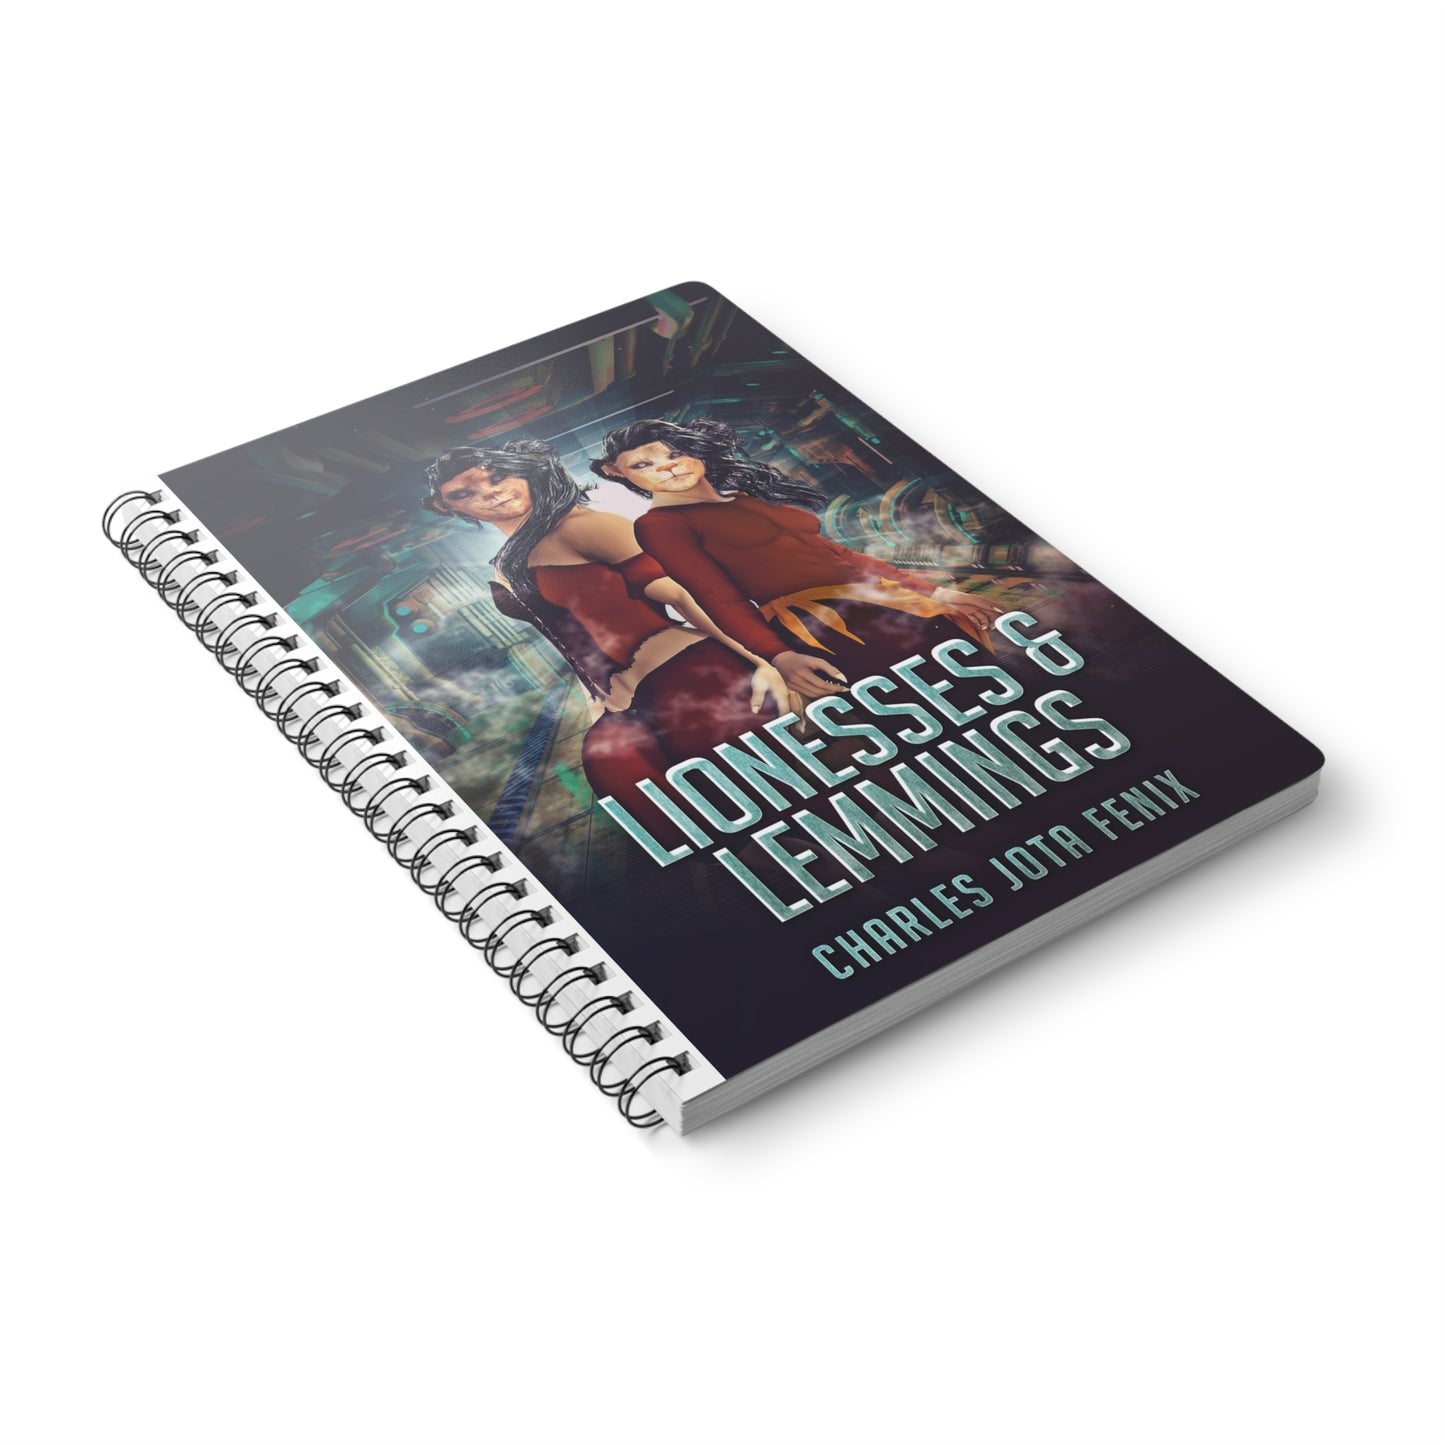 Lionesses & Lemmings - A5 Wirebound Notebook